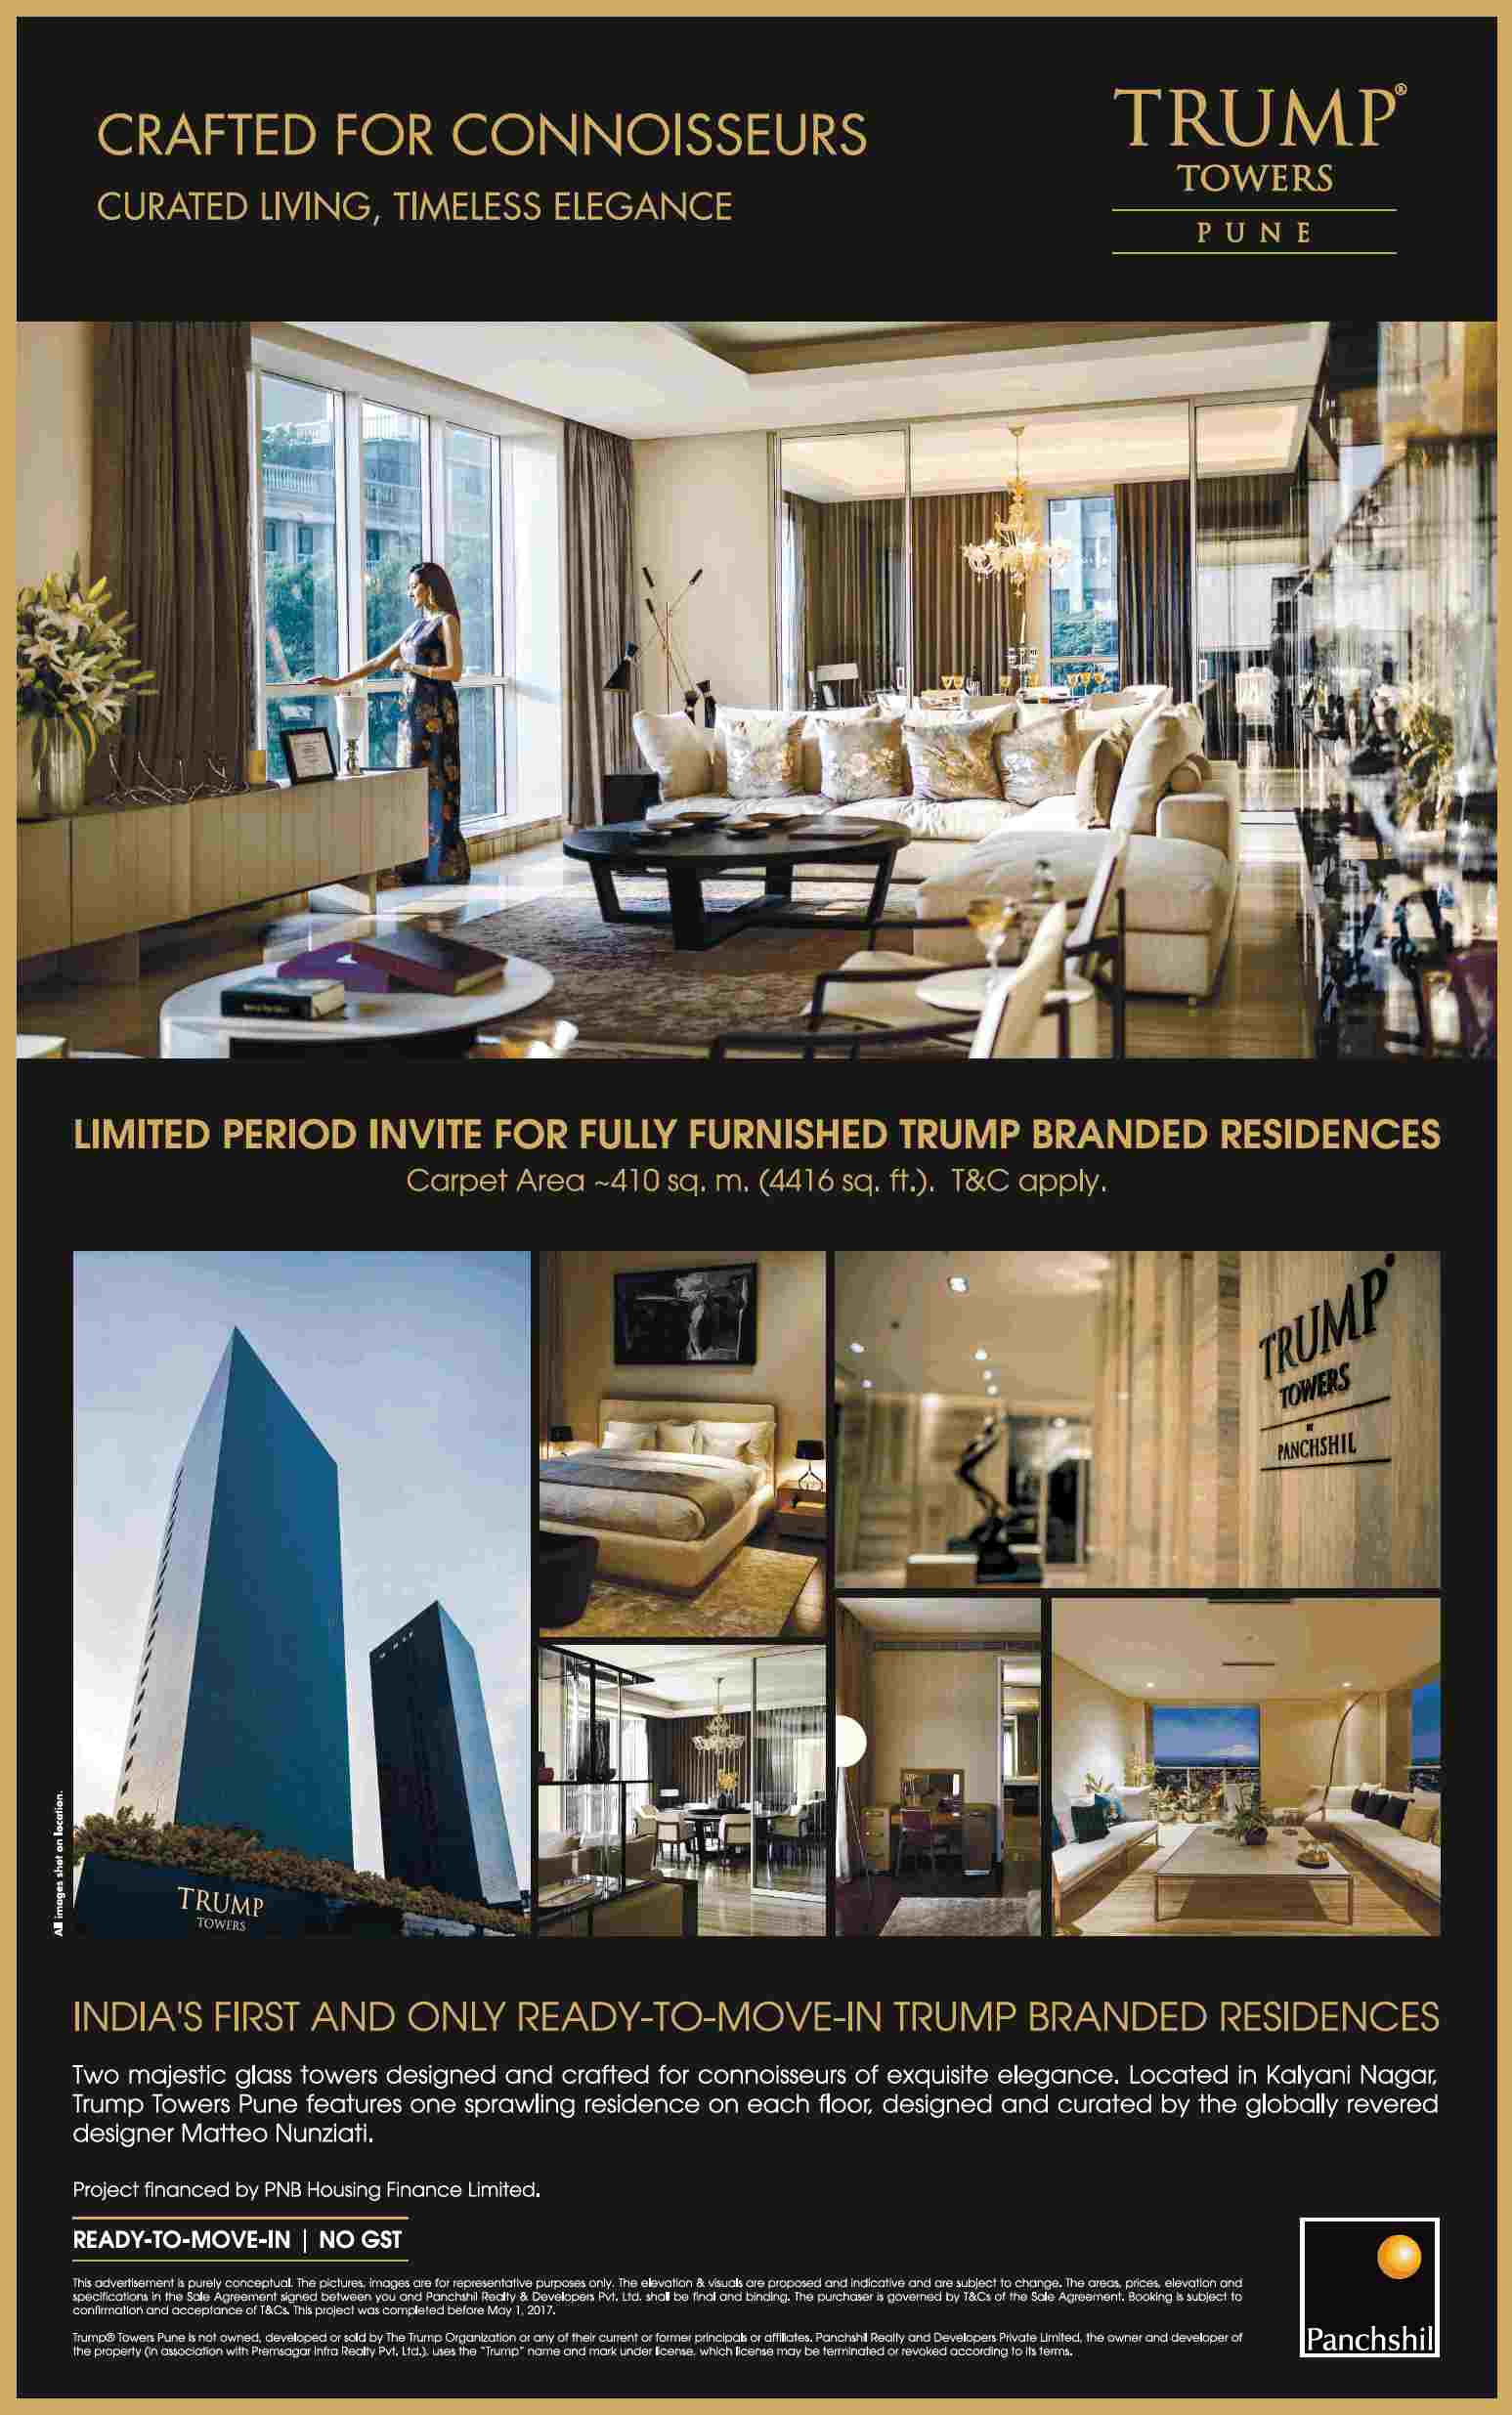 Panchshil Trump Towers is crafted for connoisseurs curated living in Kalyani Nagar, Pune